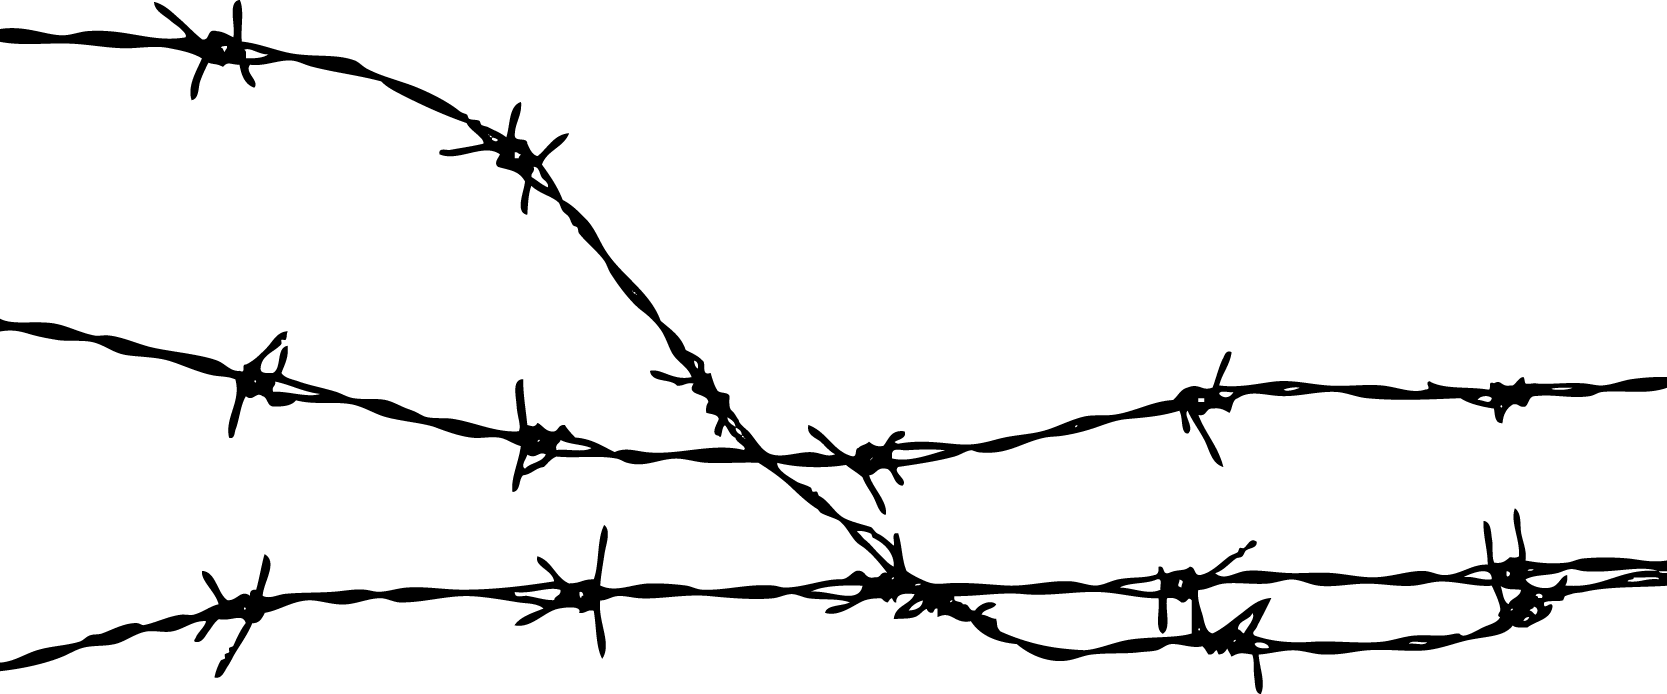 Both barbed wire material, Fe